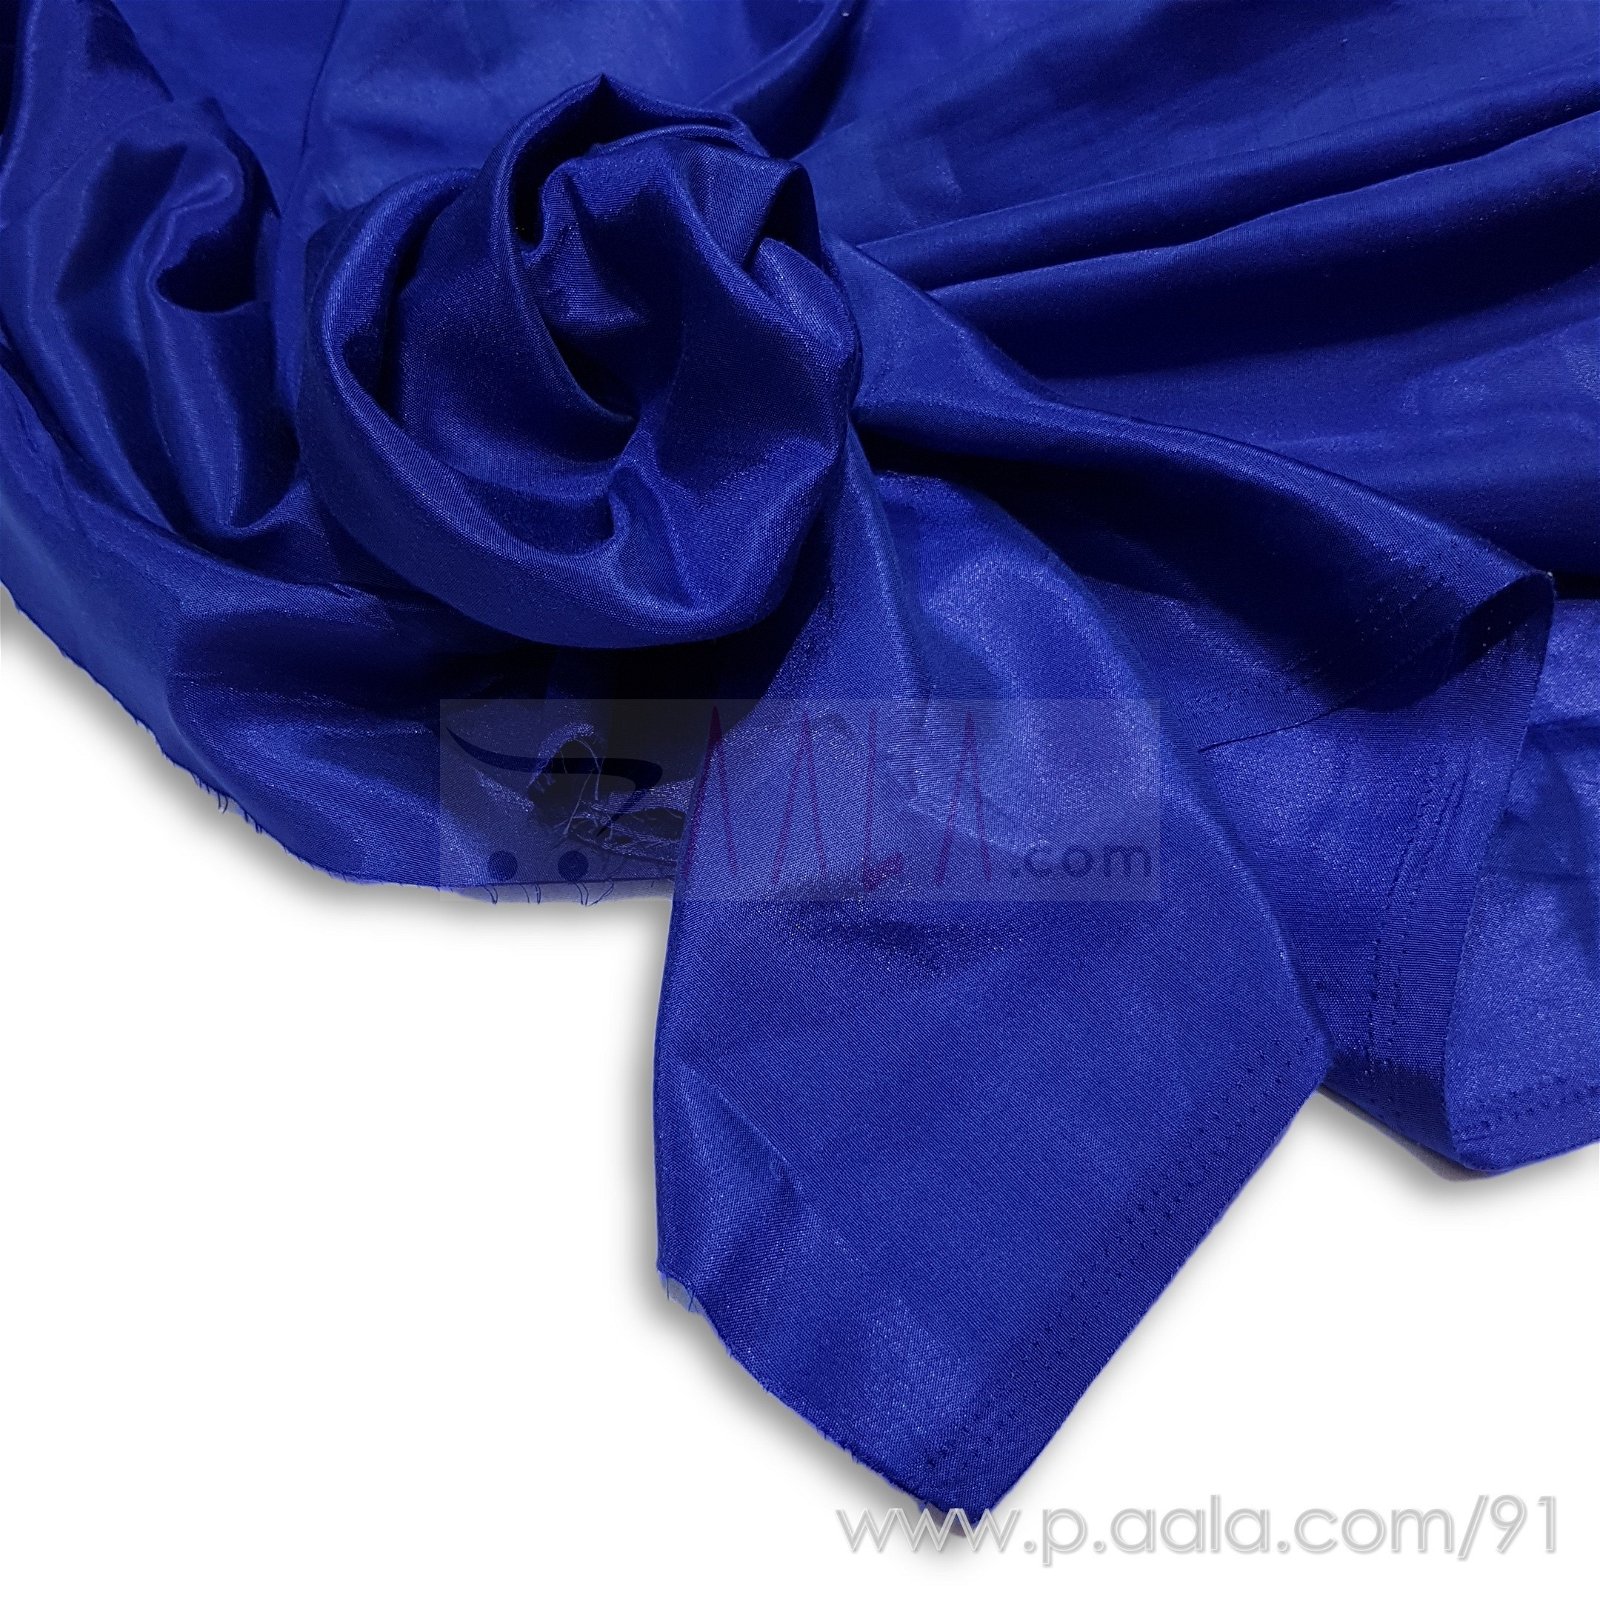 Santoon Crepe Poly-ester Z1 44 Inches Dyed Per Metre #91